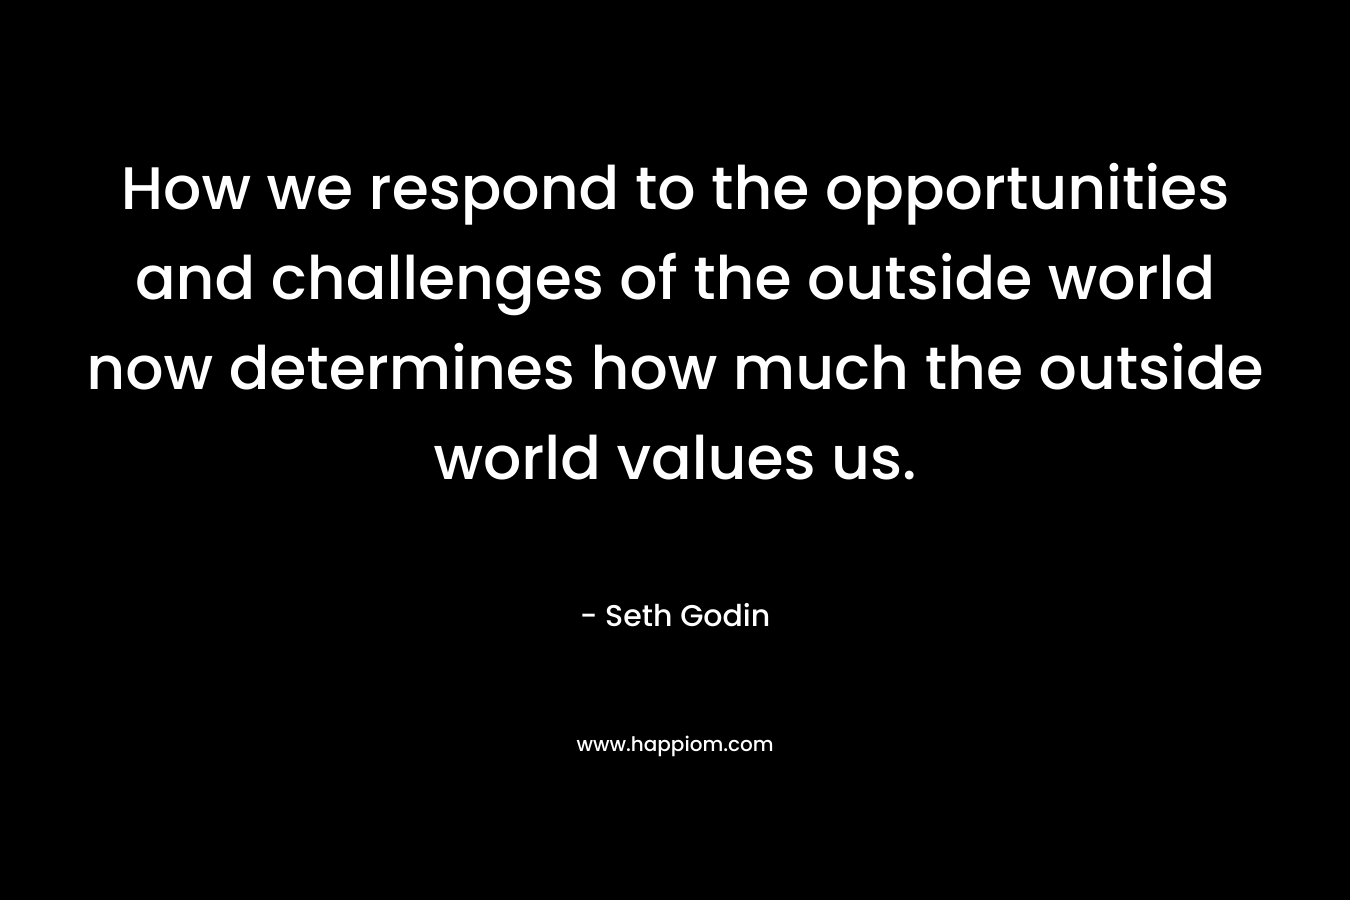 How we respond to the opportunities and challenges of the outside world now determines how much the outside world values us. – Seth Godin